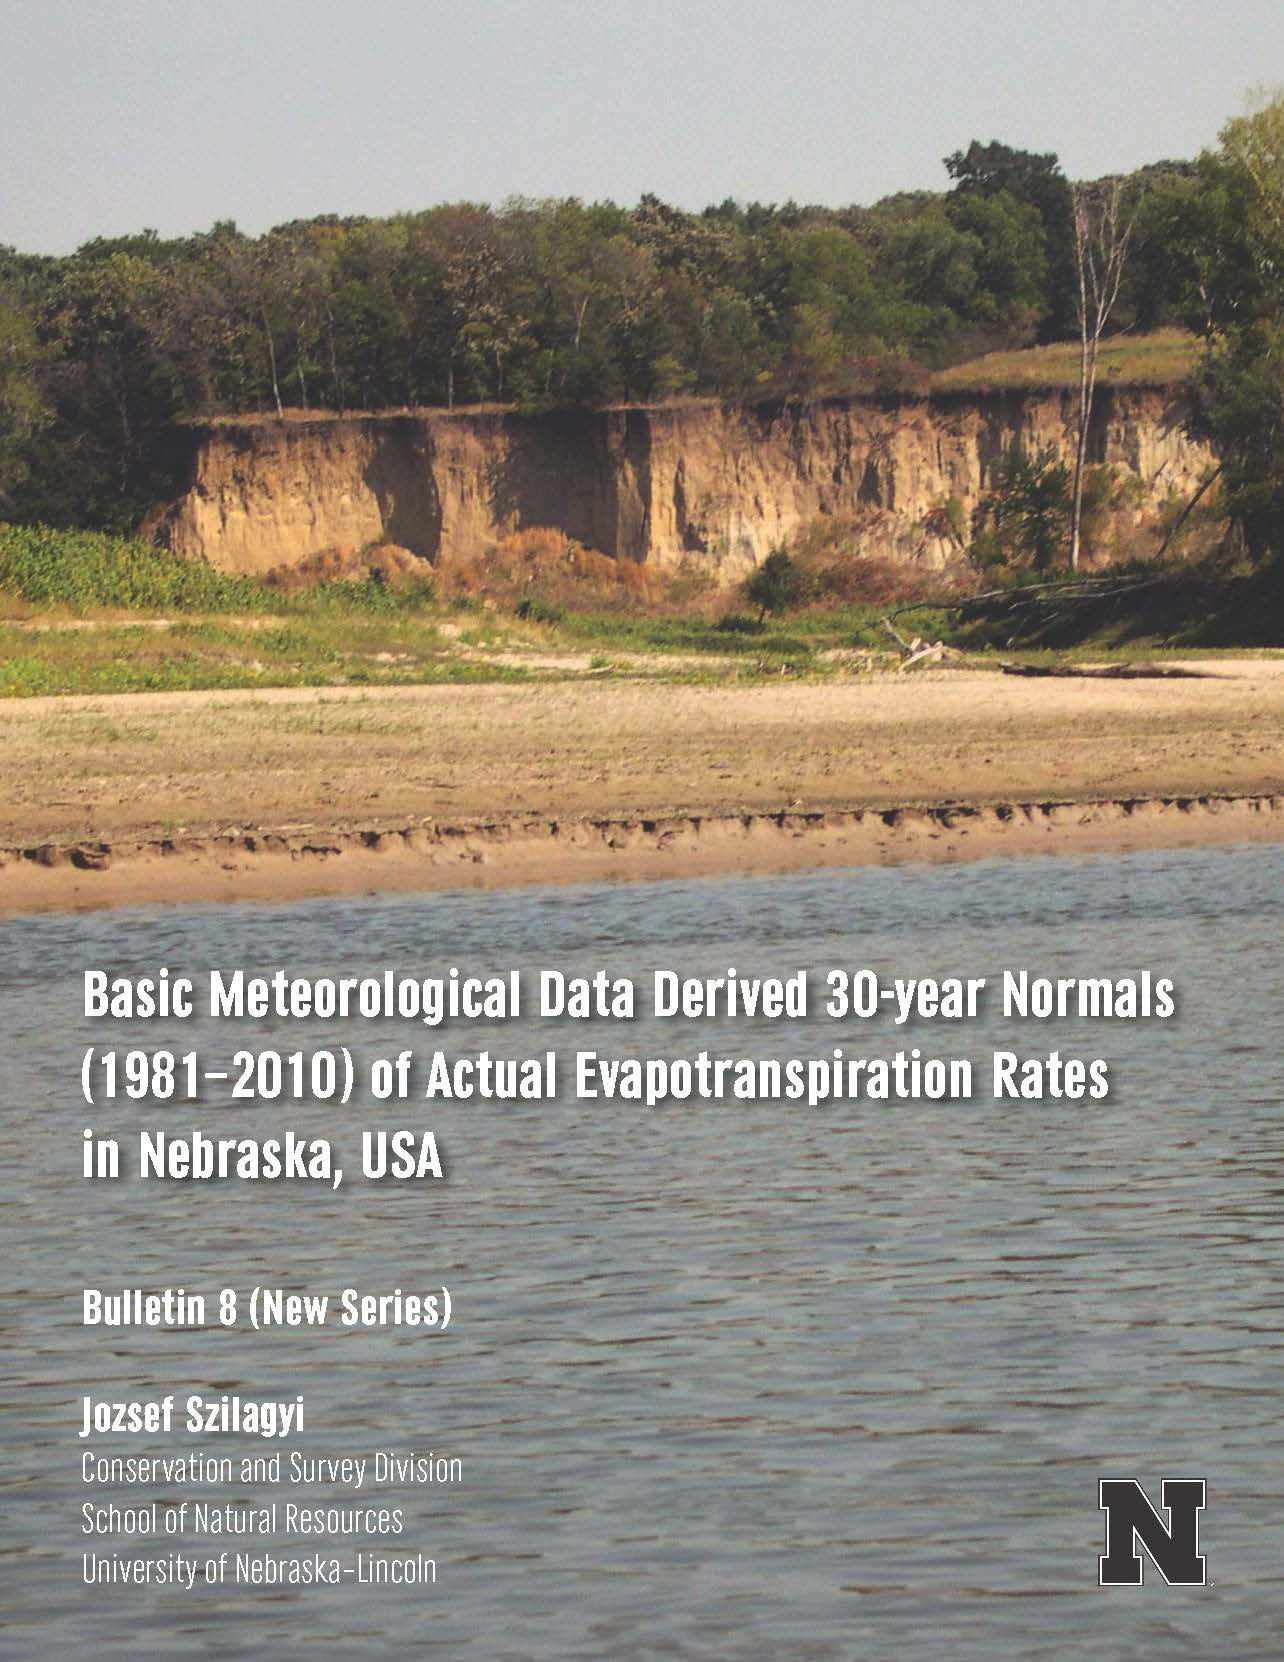 Basic Meteorological Data Derived 30-year Normals (1981 - 2010) of Actual Evaportranspiration Rates in Nebraska, USA (CB-8(NS))